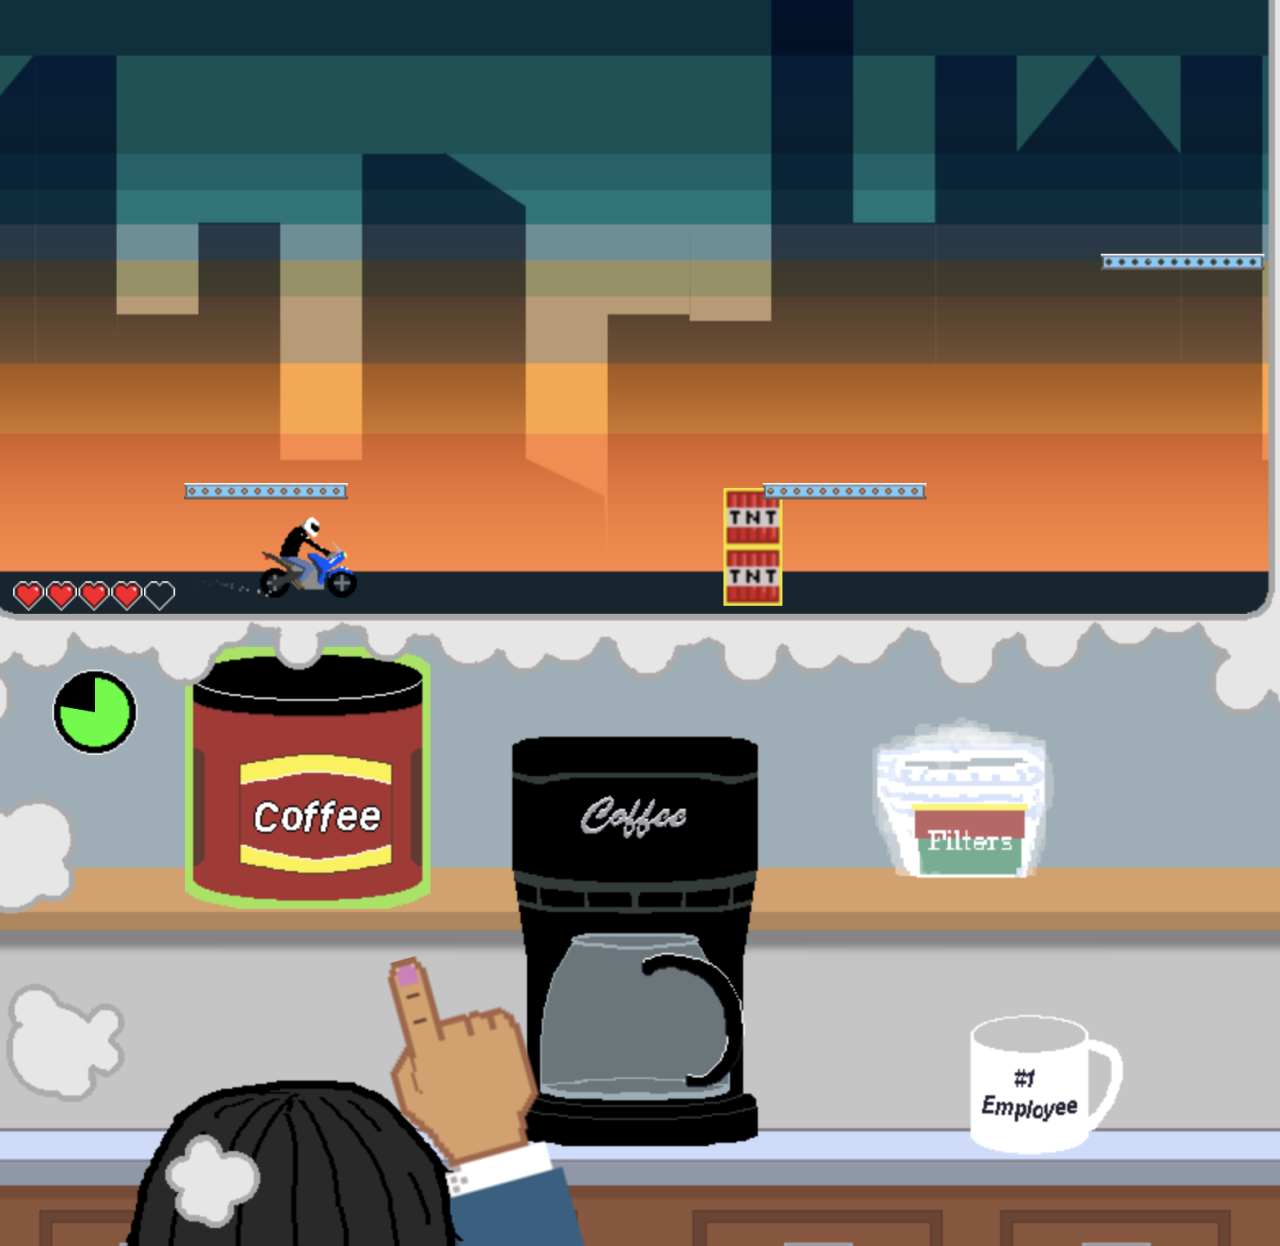 screenshot showing the game: the lower half is various office mini games while the upper "daydrem" is a motorcycle platformer